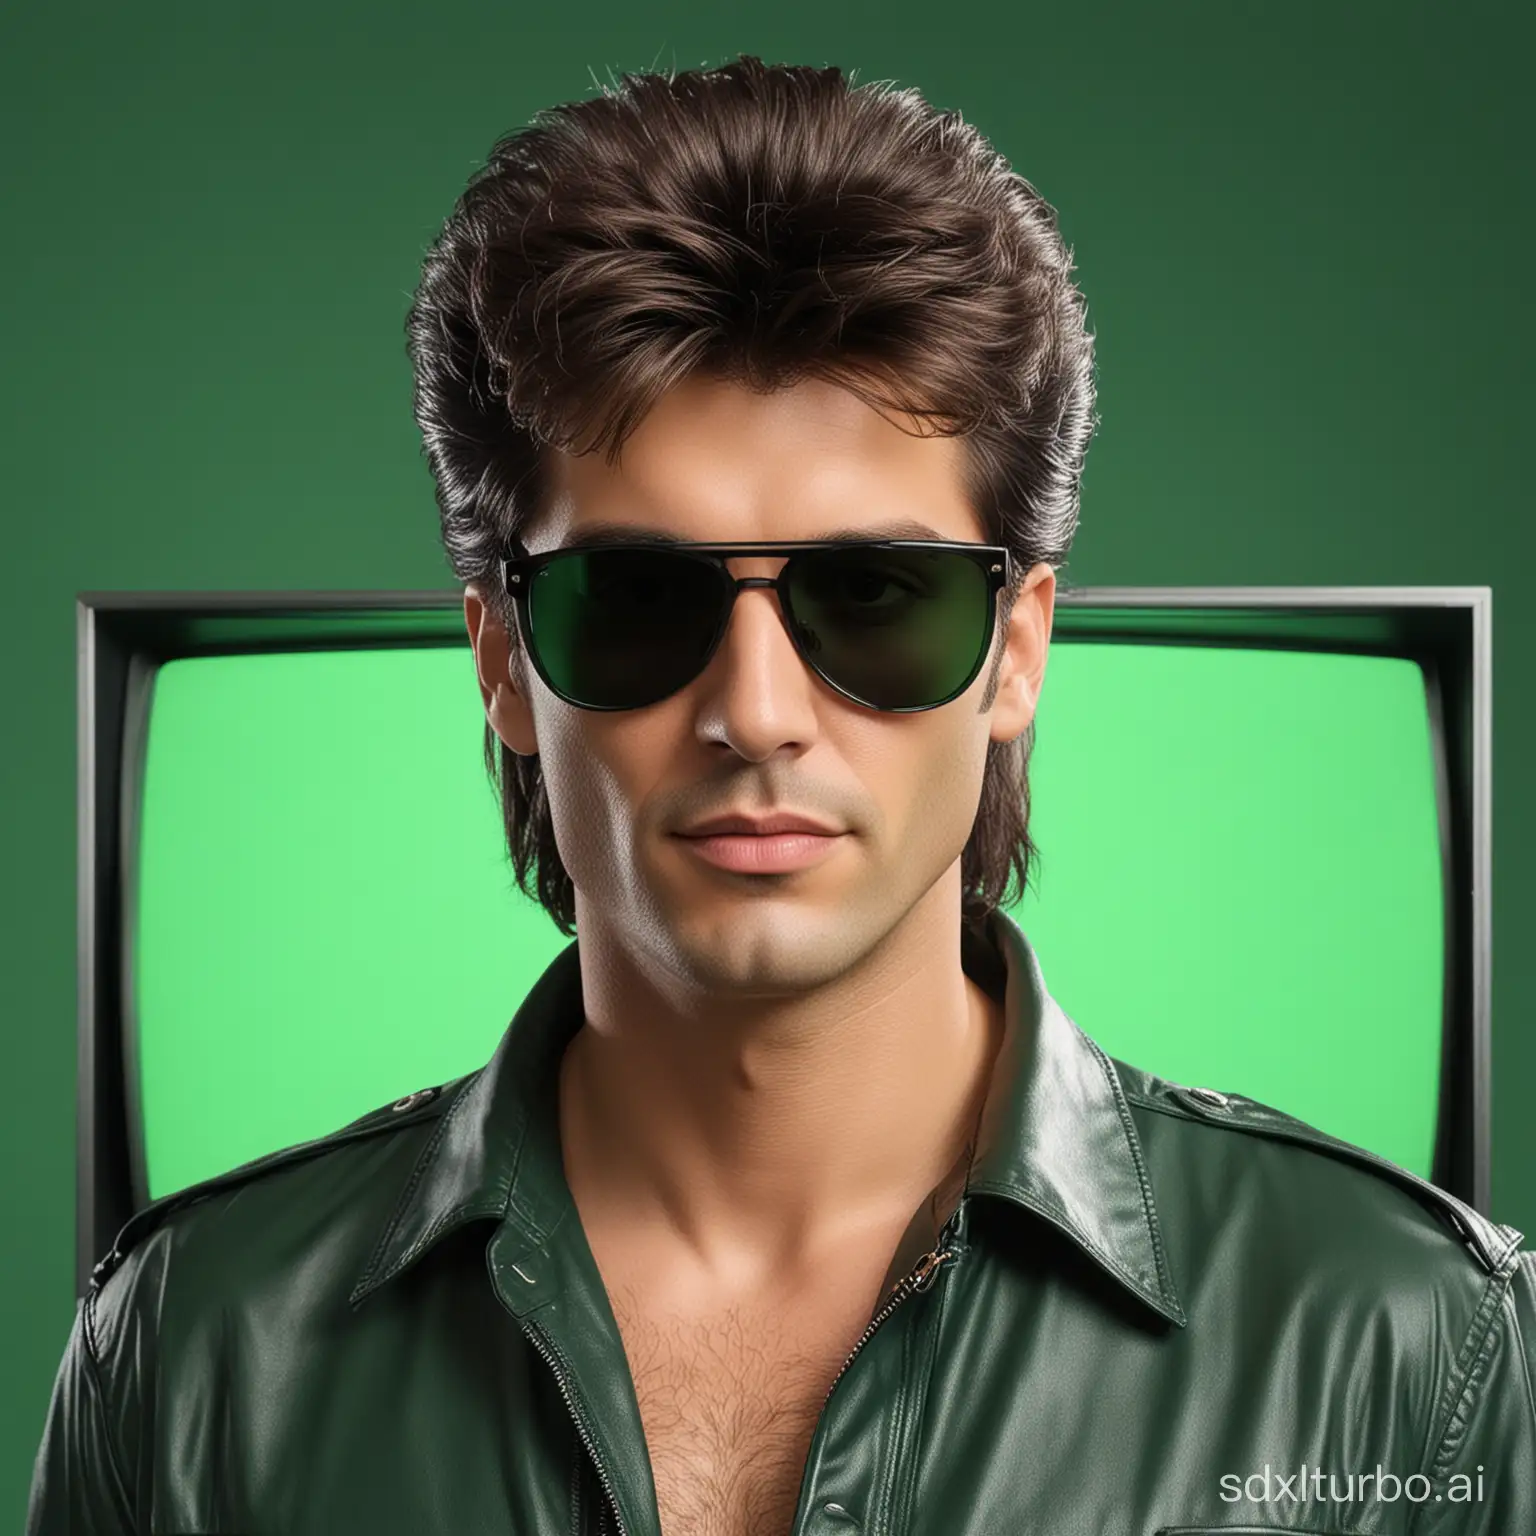 Photorealistic image of a TV presenter wearing dark sunglasses, 80s clothing and pompadour hair looking straight ahead with a clean green chrome screen behind him.